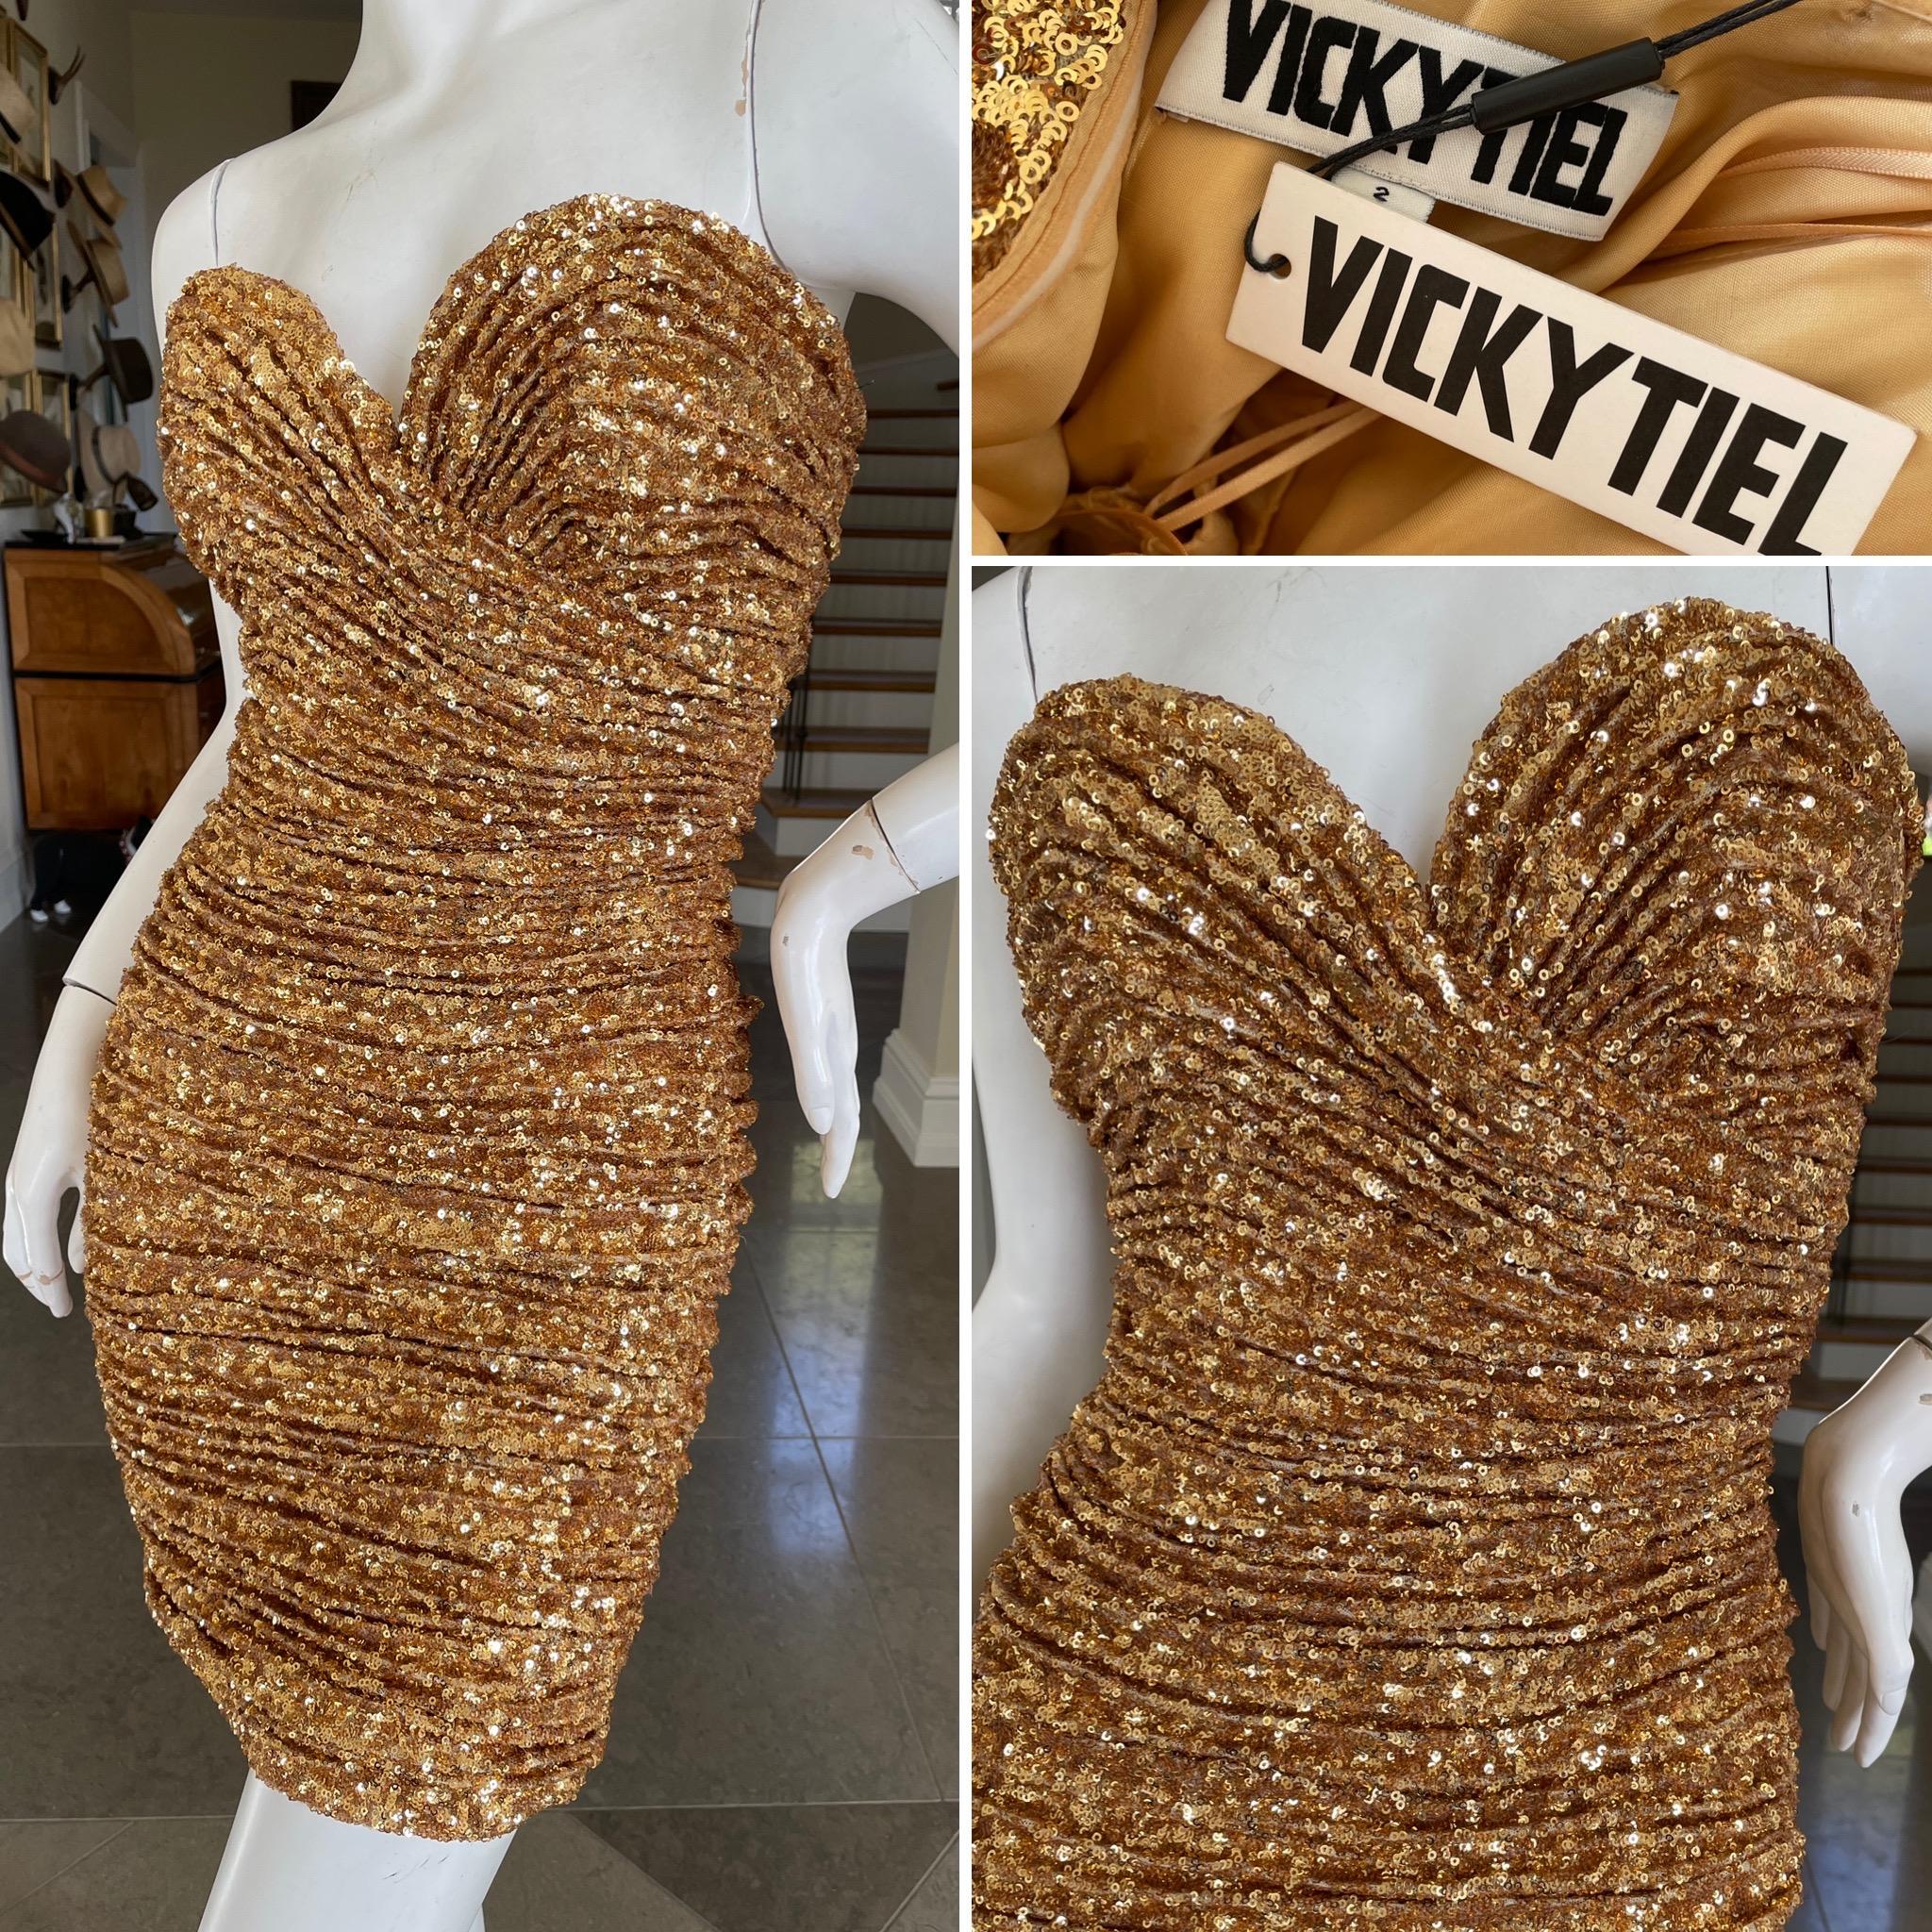 Vicky Tiel Paris Sensational 80's Gold Sequin Strapless Cocktail Dress.
Unworn with tags.
The witty quote was 